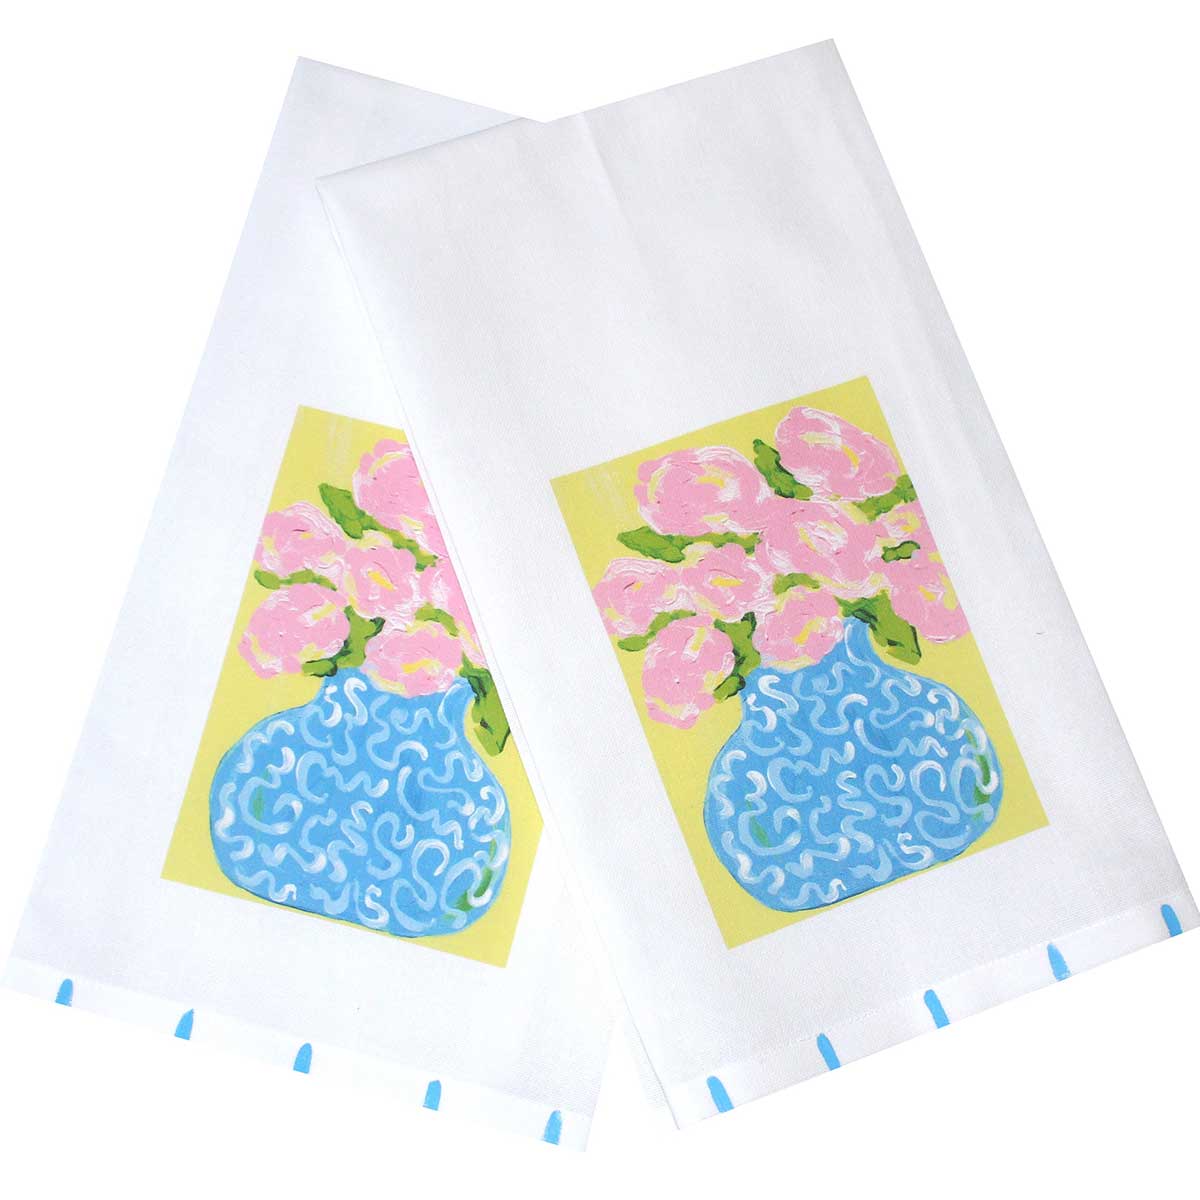 Cottage Roses in Blue Chinoiserie Vase Tea Towel 